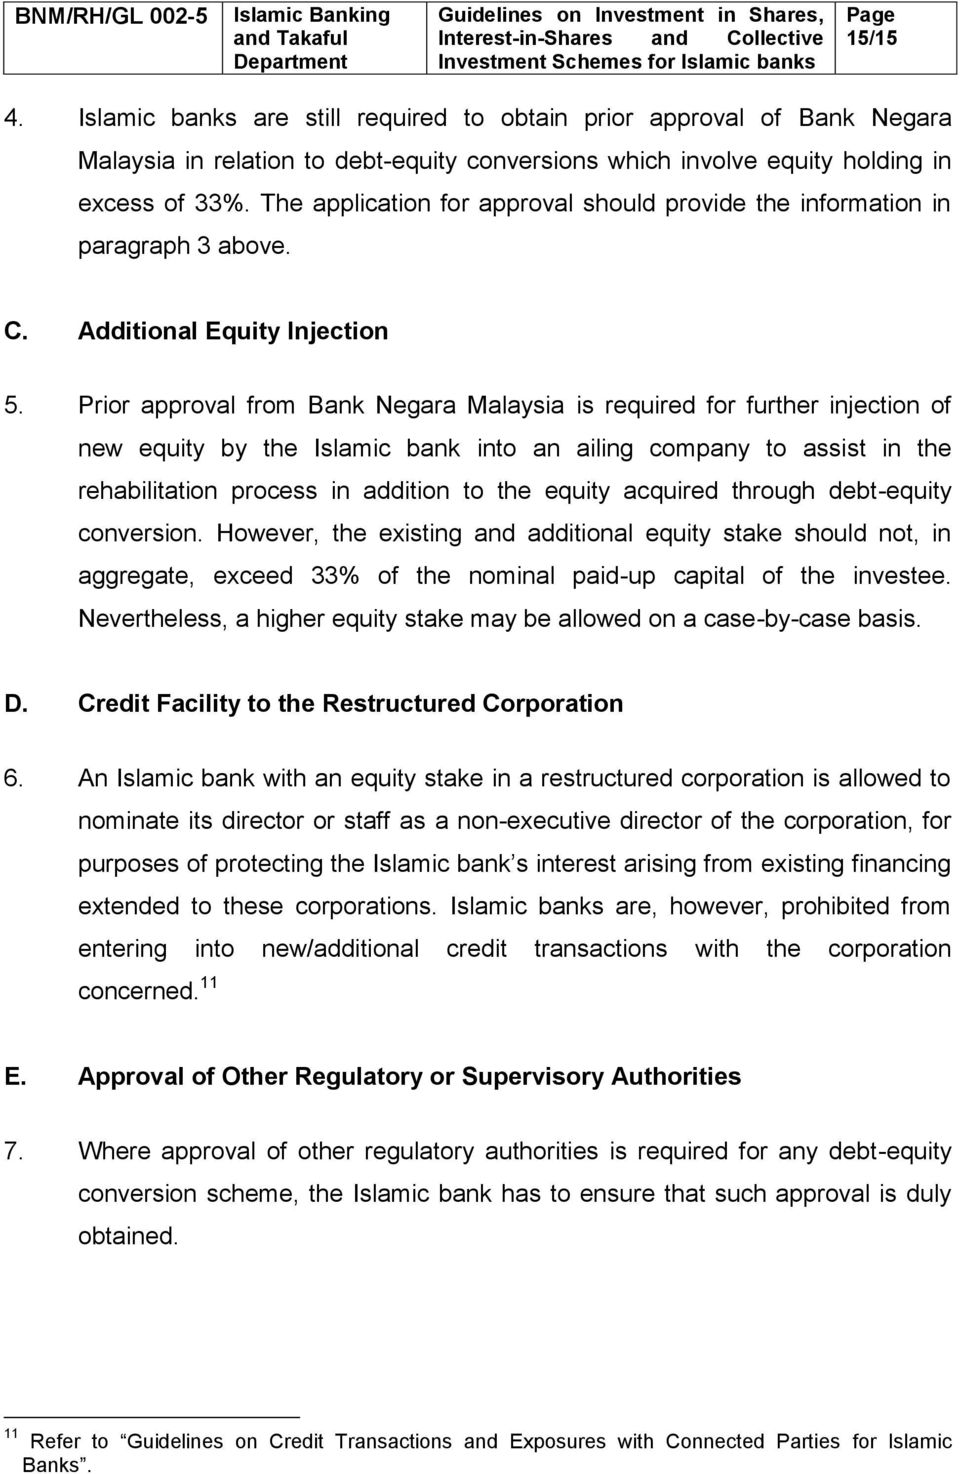 Prior approval from Bank Negara Malaysia is required for further injection of new equity by the Islamic bank into an ailing company to assist in the rehabilitation process in addition to the equity